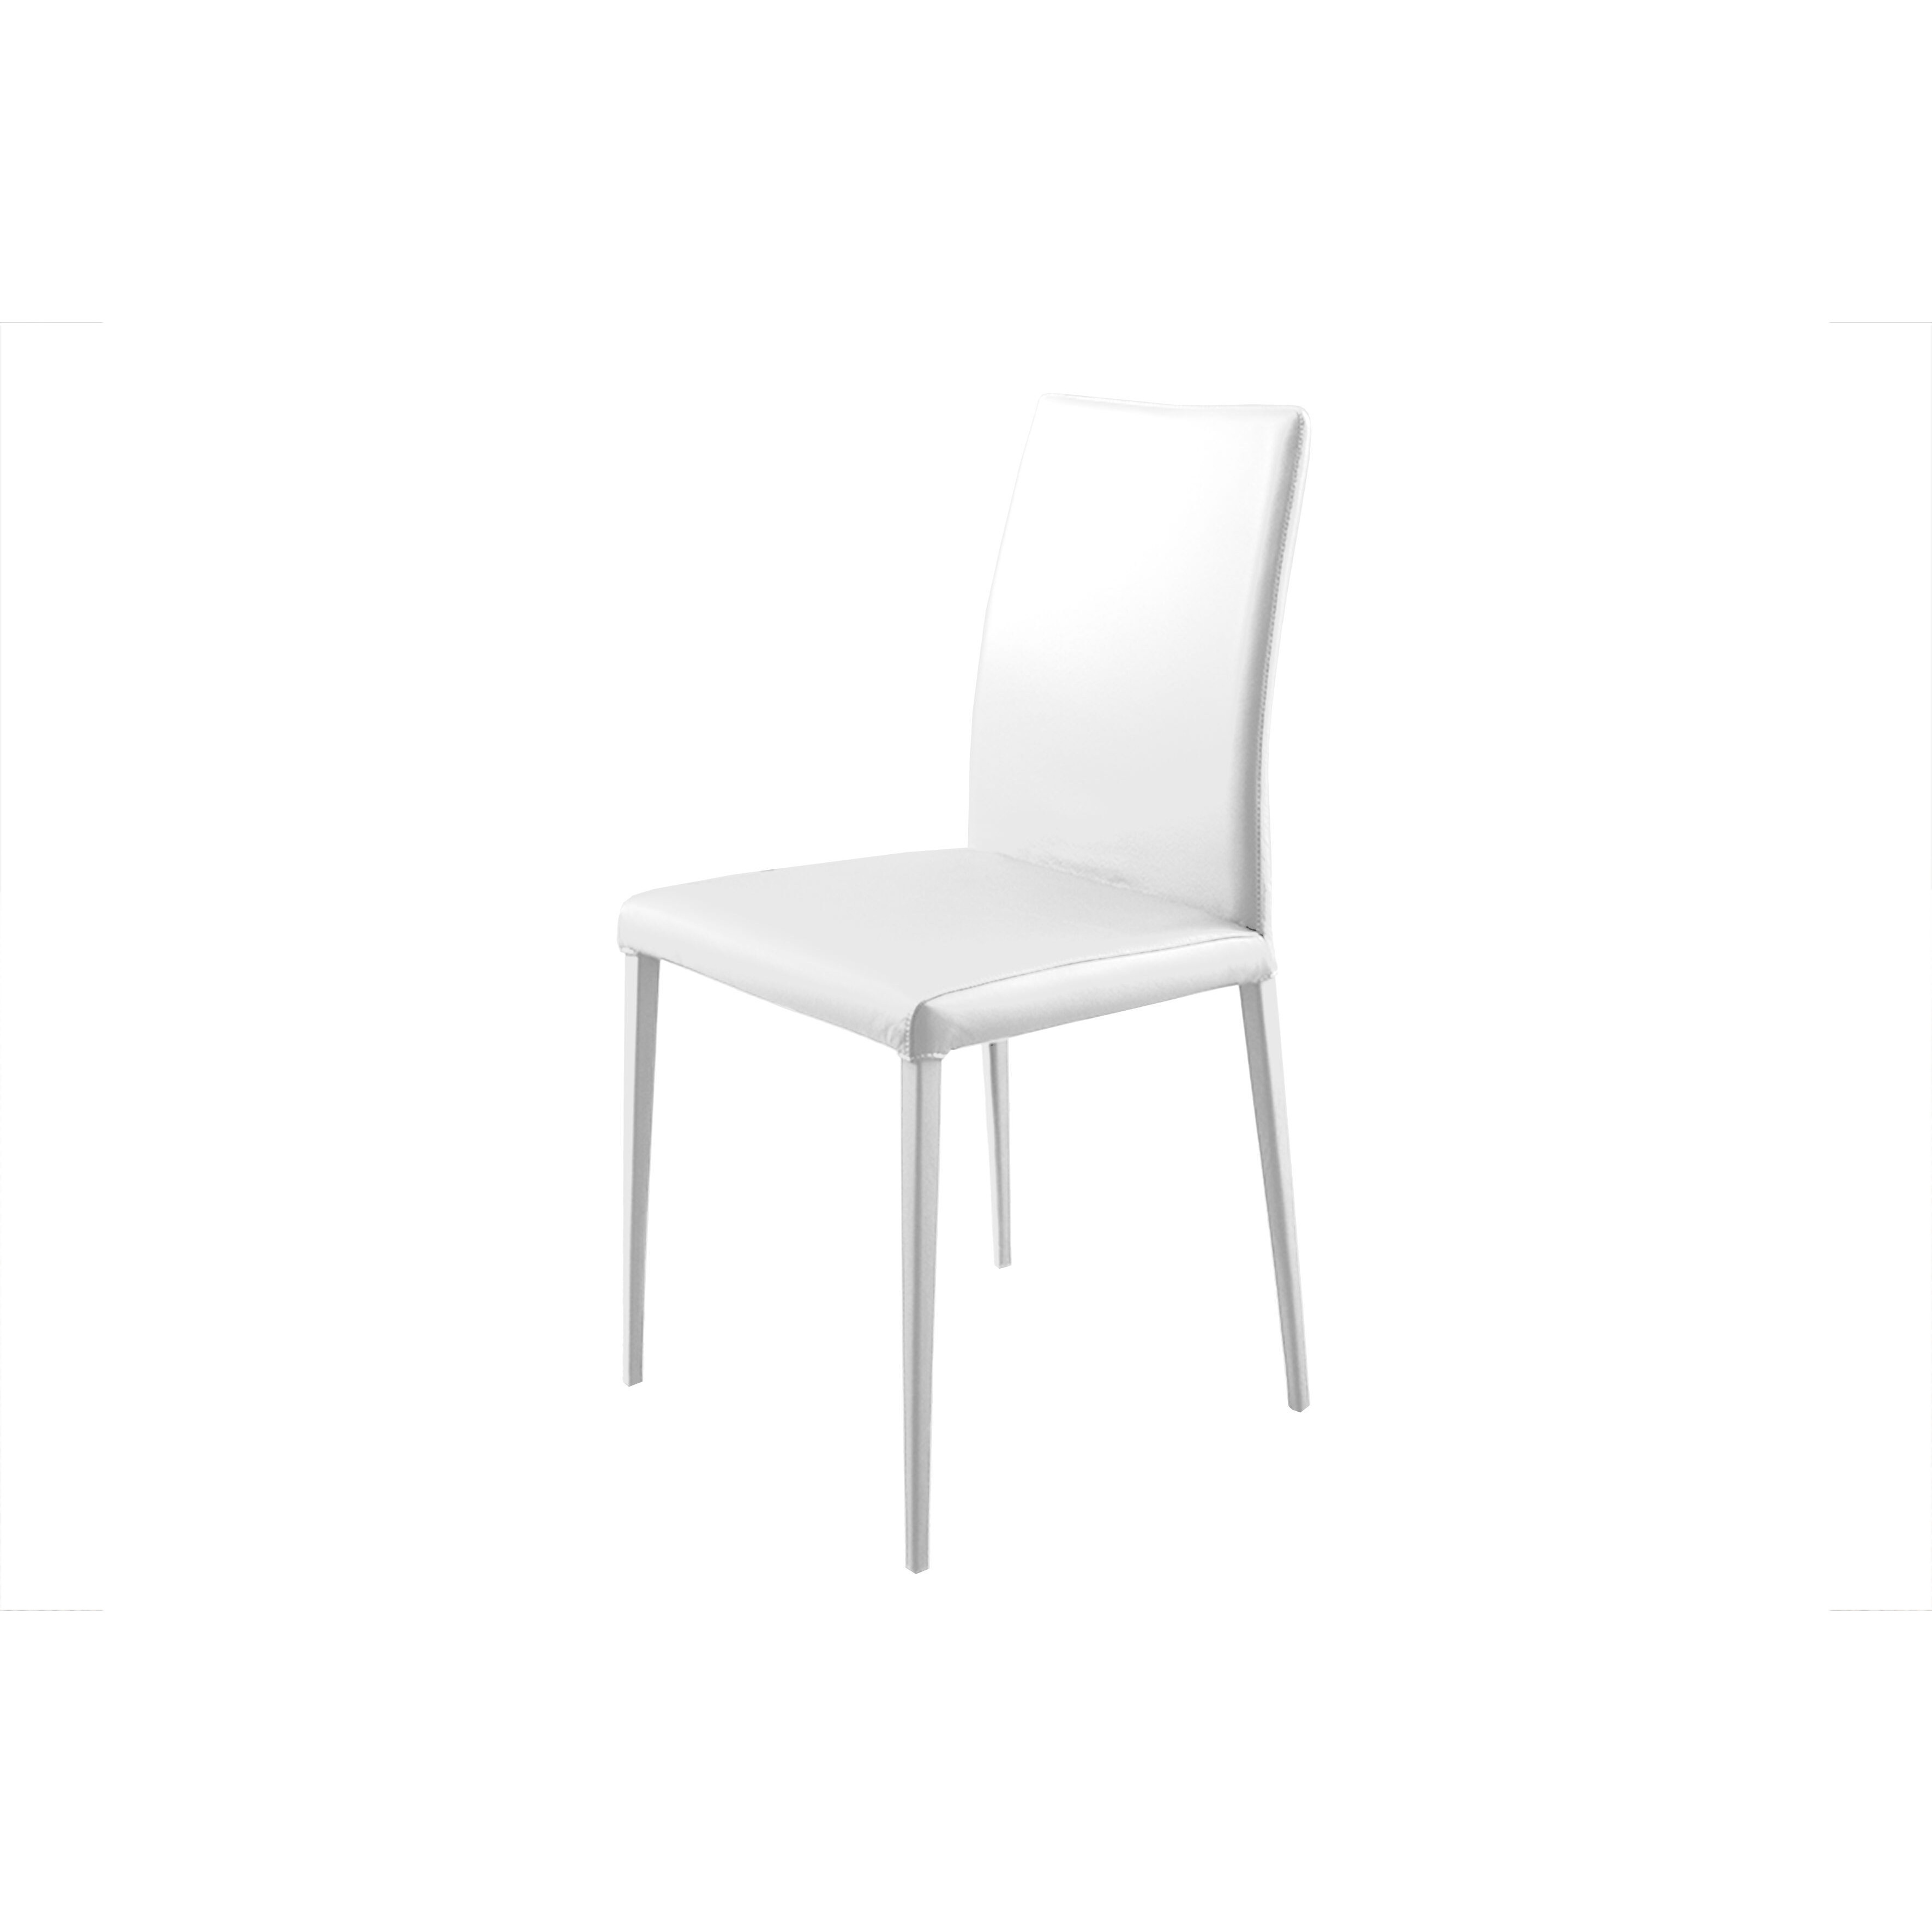 Dandy Leather Dining Chair, White